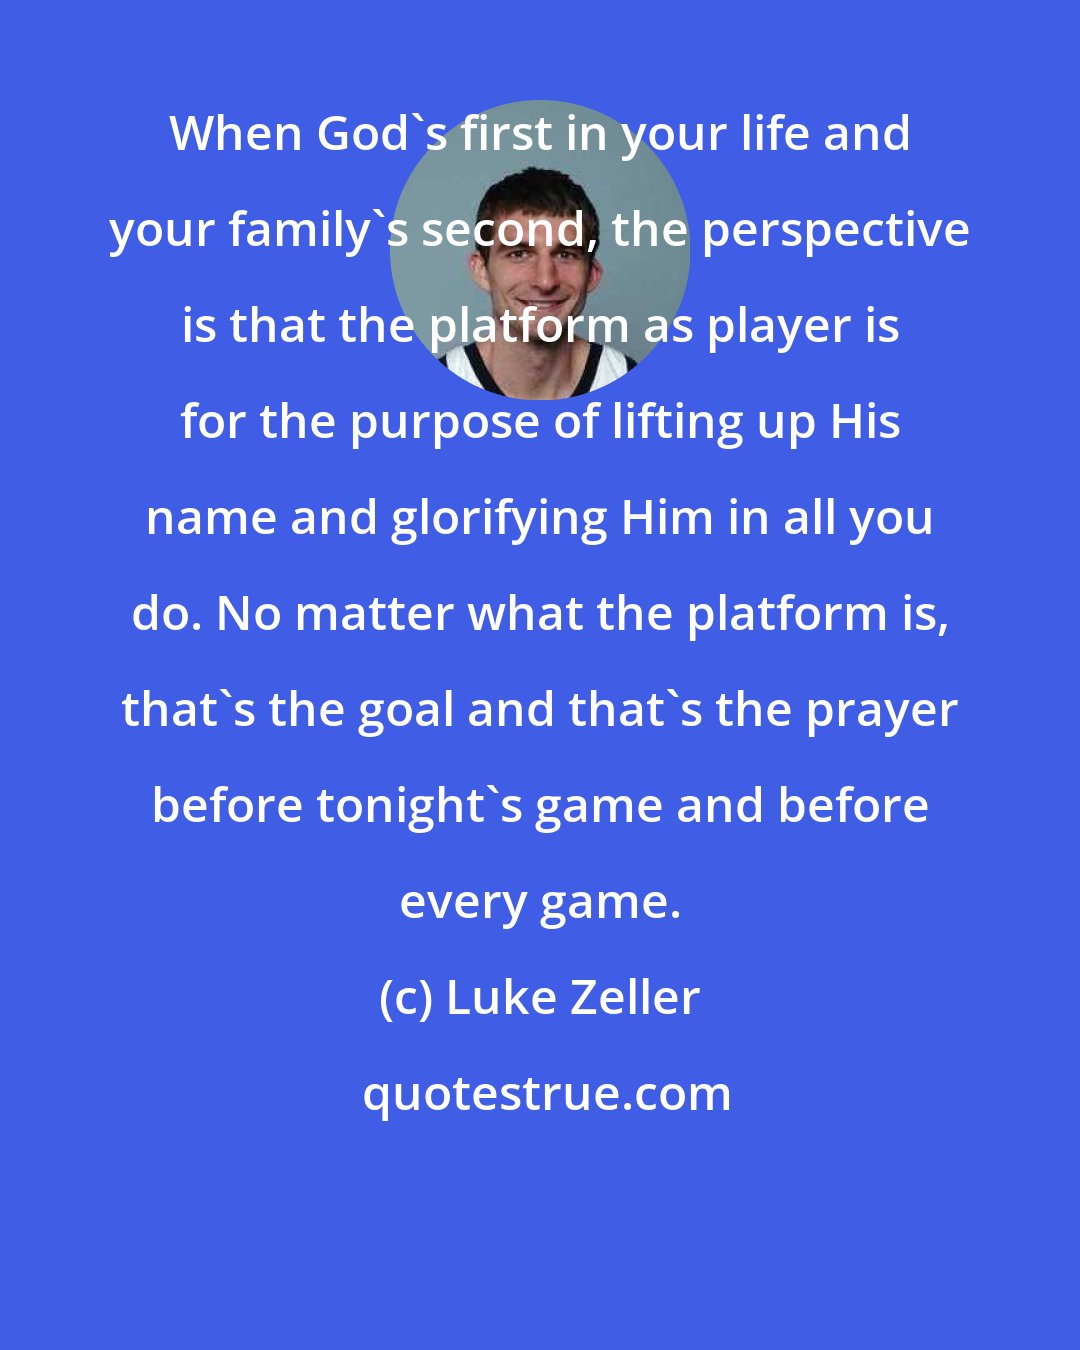 Luke Zeller: When God's first in your life and your family's second, the perspective is that the platform as player is for the purpose of lifting up His name and glorifying Him in all you do. No matter what the platform is, that's the goal and that's the prayer before tonight's game and before every game.